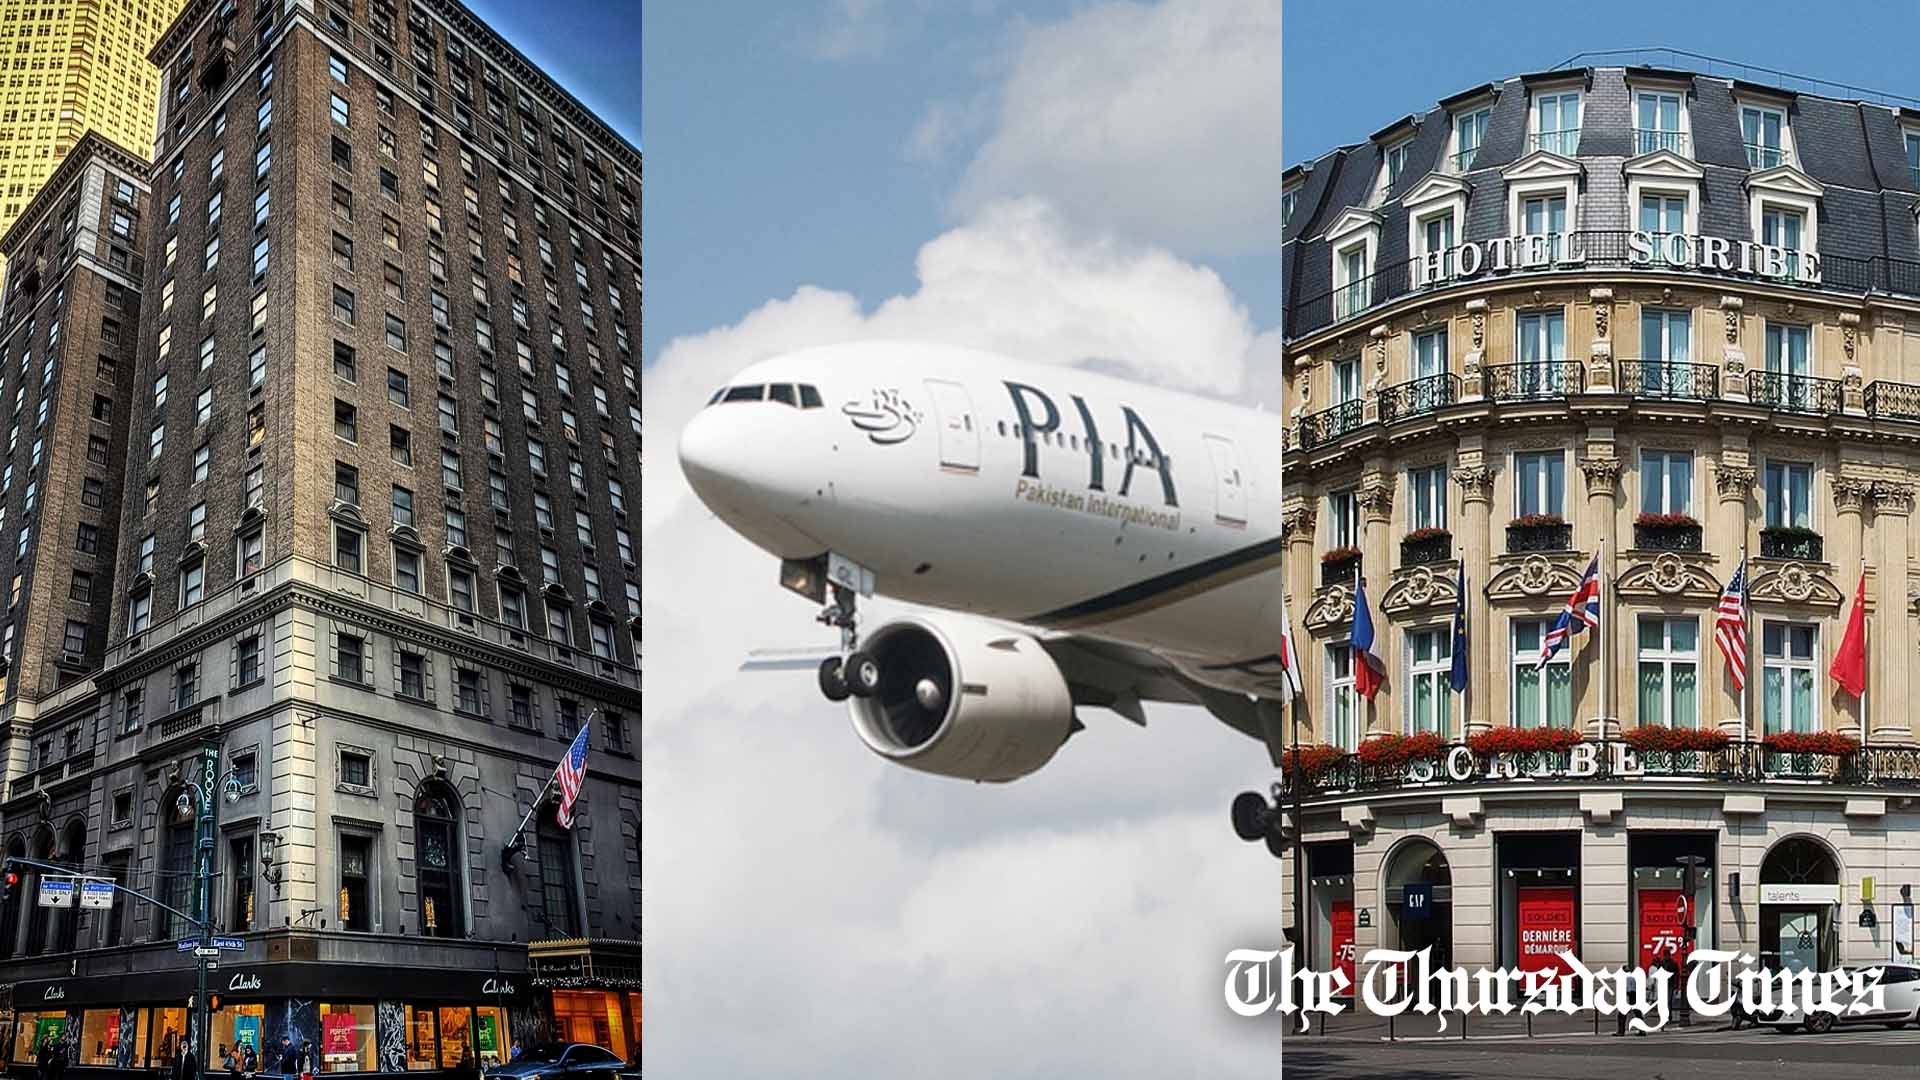 A combined file photo is shown of the Roosevelt Hotel in New York (L), a PIA plane (C), and the Hotel Scribe in Paris (R). — FILE/THE THURSDAY TIMES